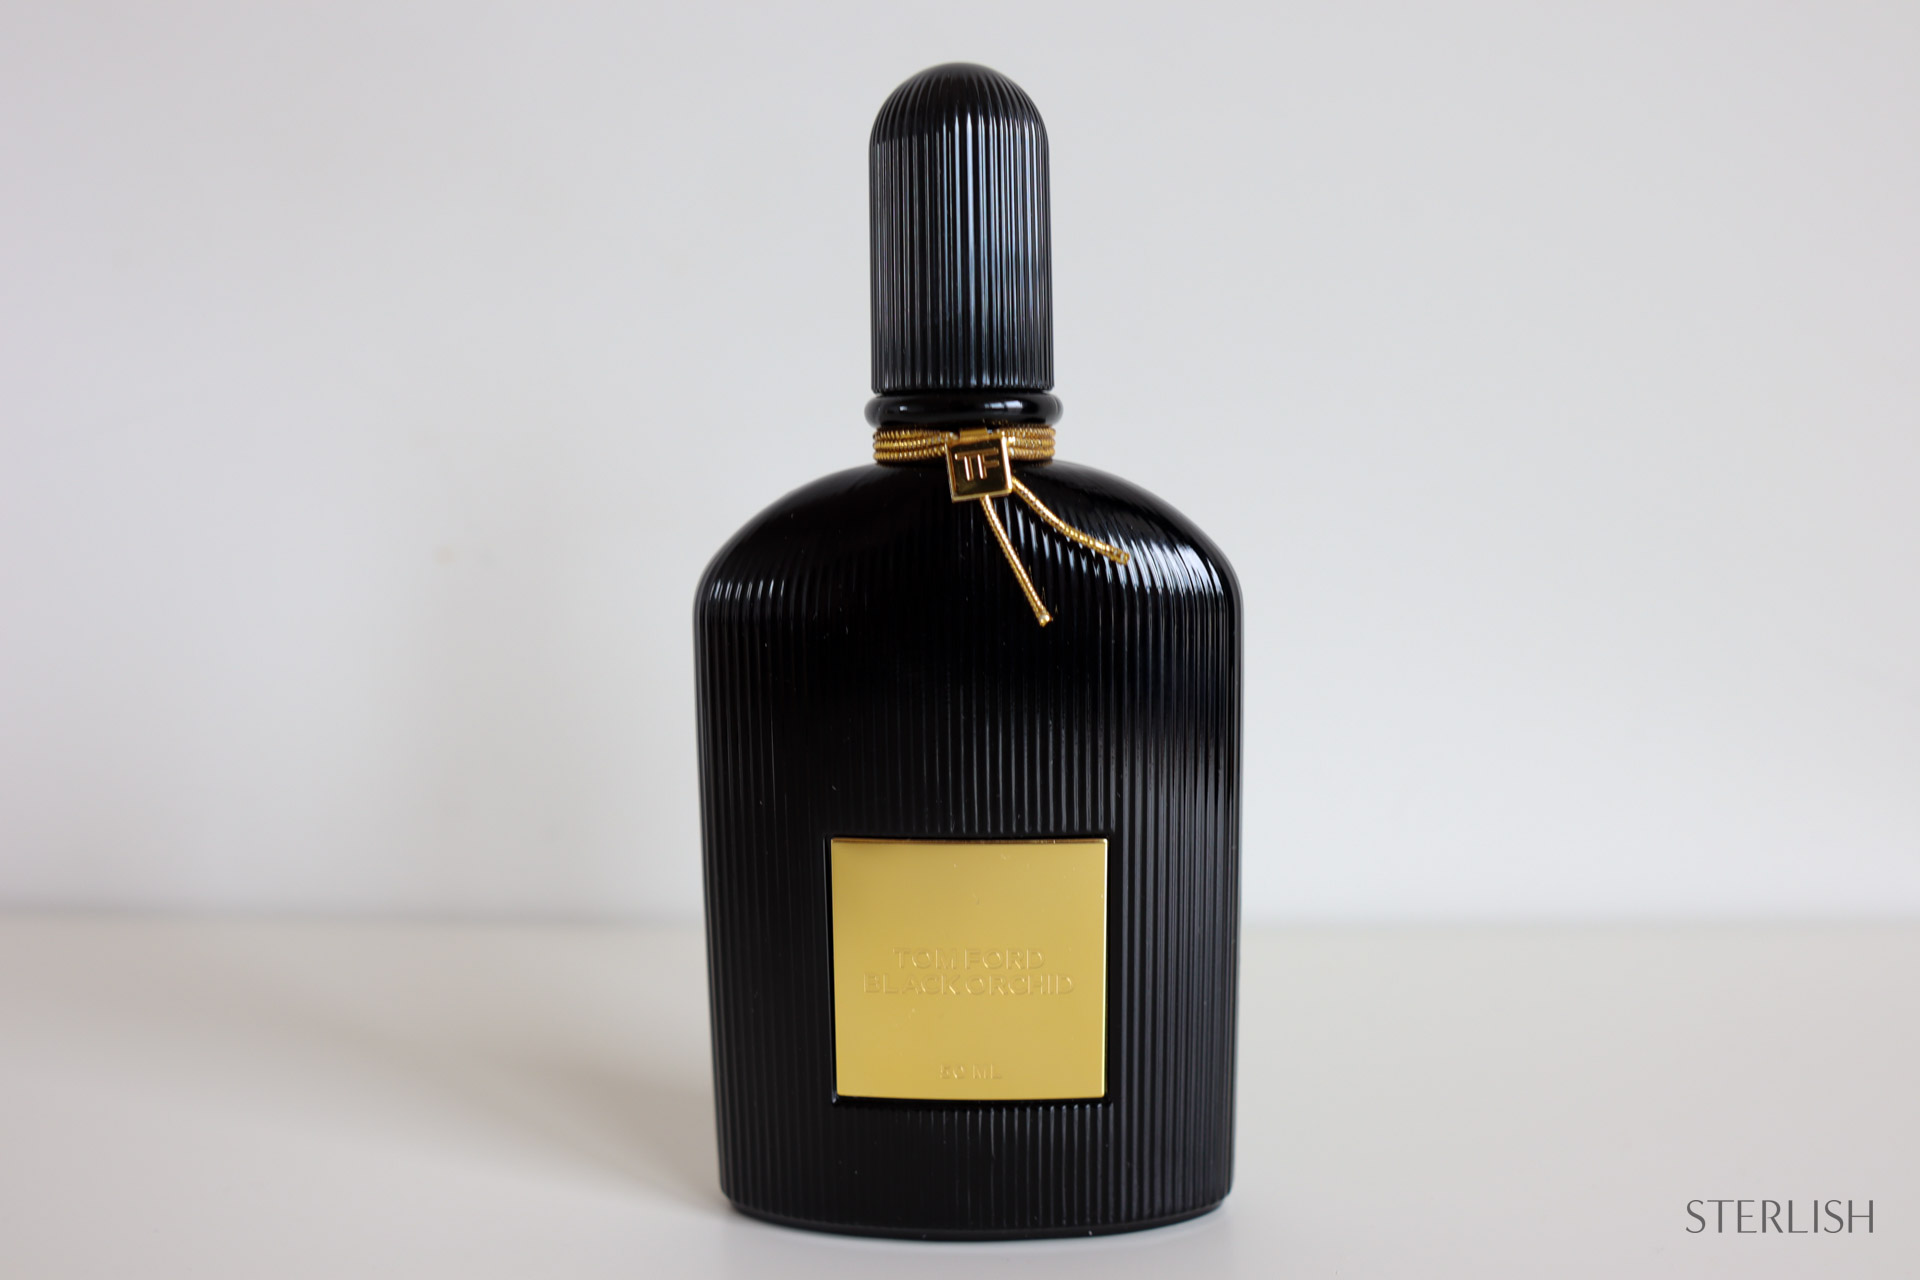 Best Tom Ford perfume for men and women 2022: From black orchid to